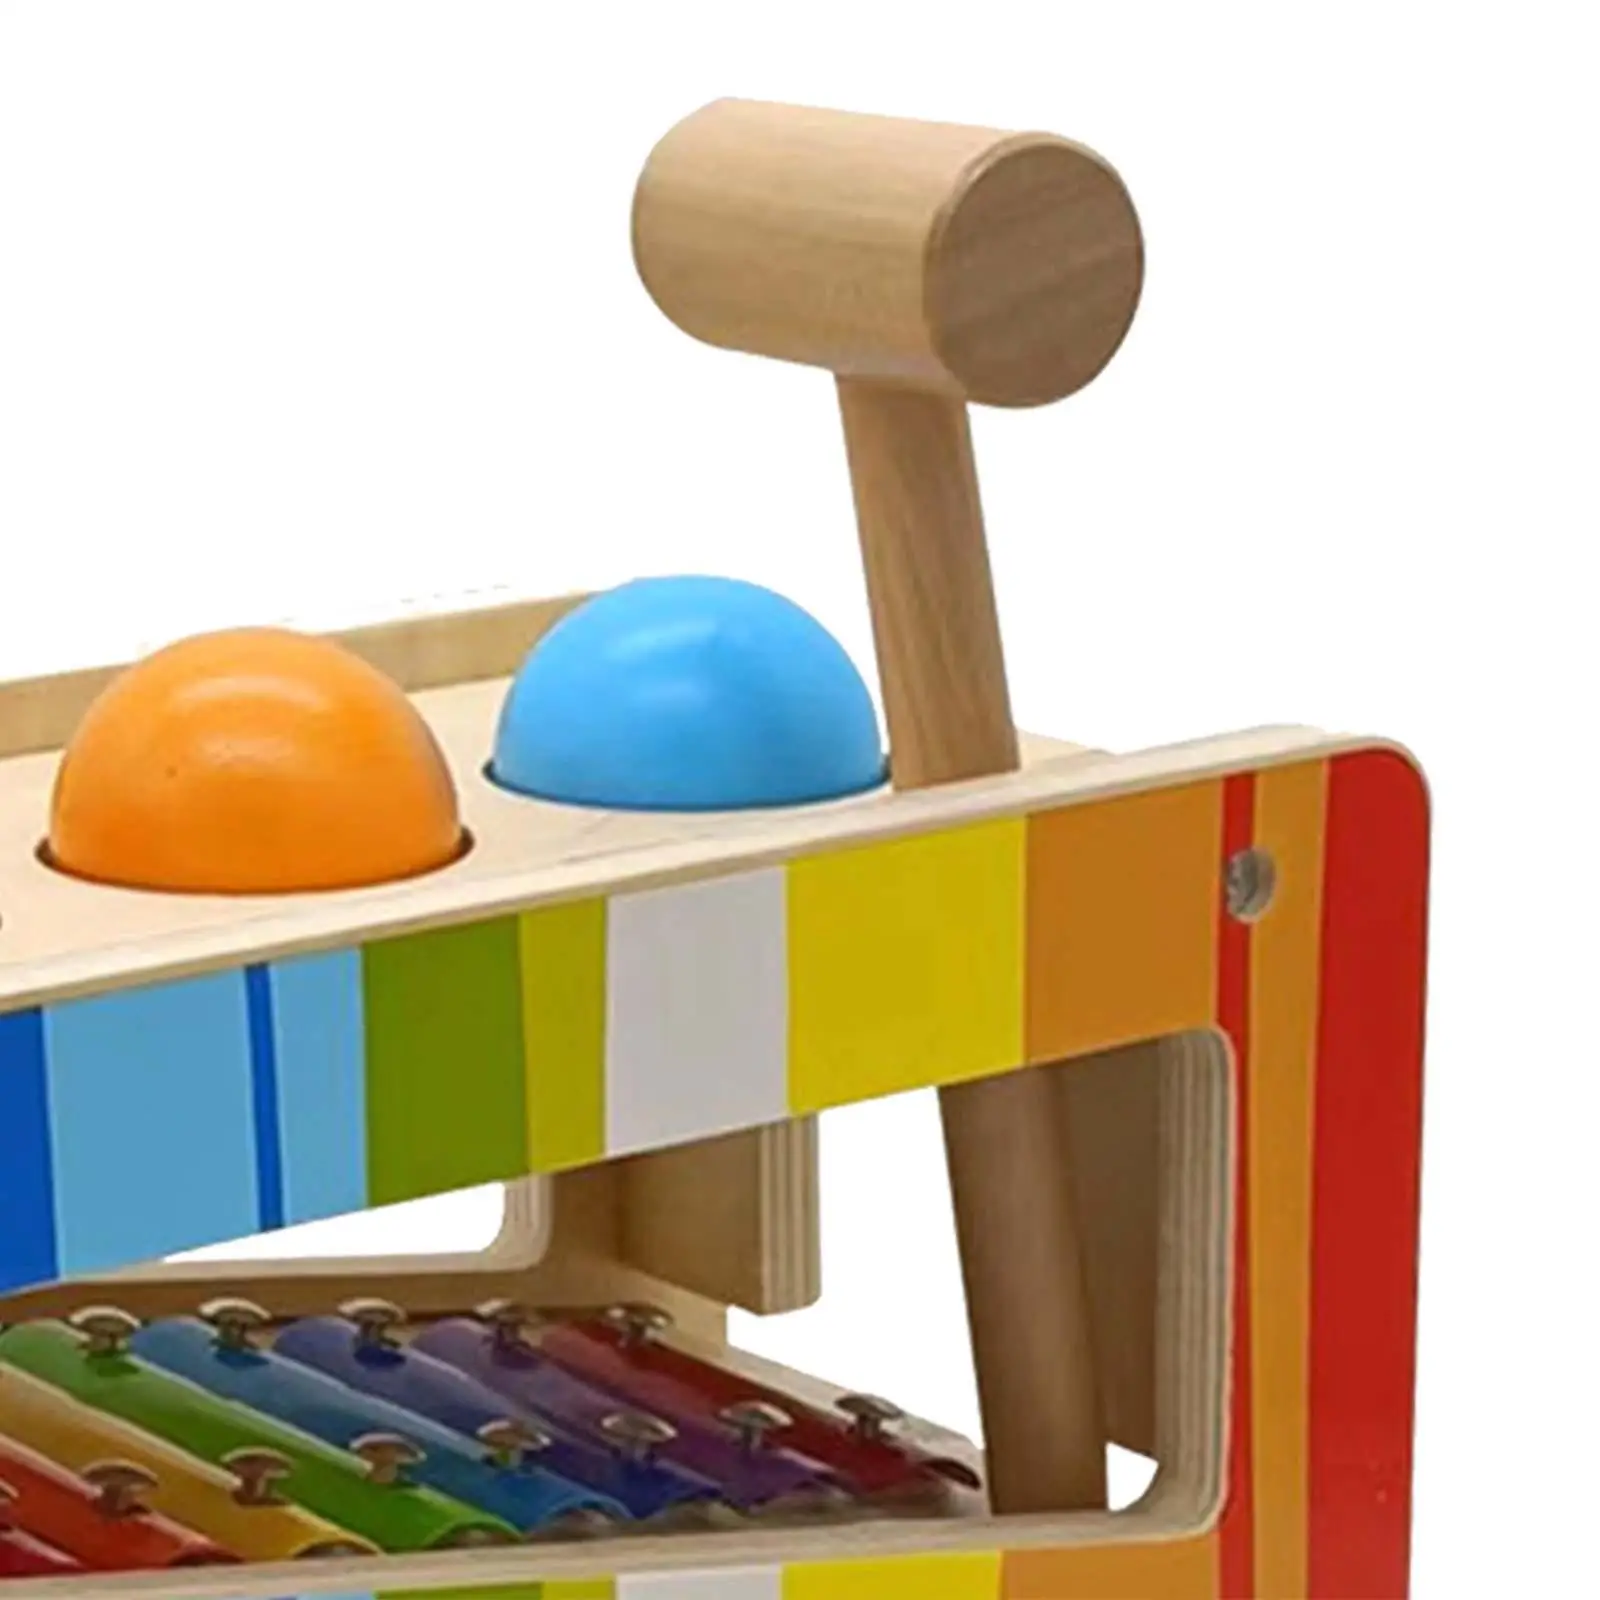 

Pound & Tap Bench Musical Pounding and Hammer Toy Multifunctional with Slide Out Xylophone Early Education for Toddlers Kids